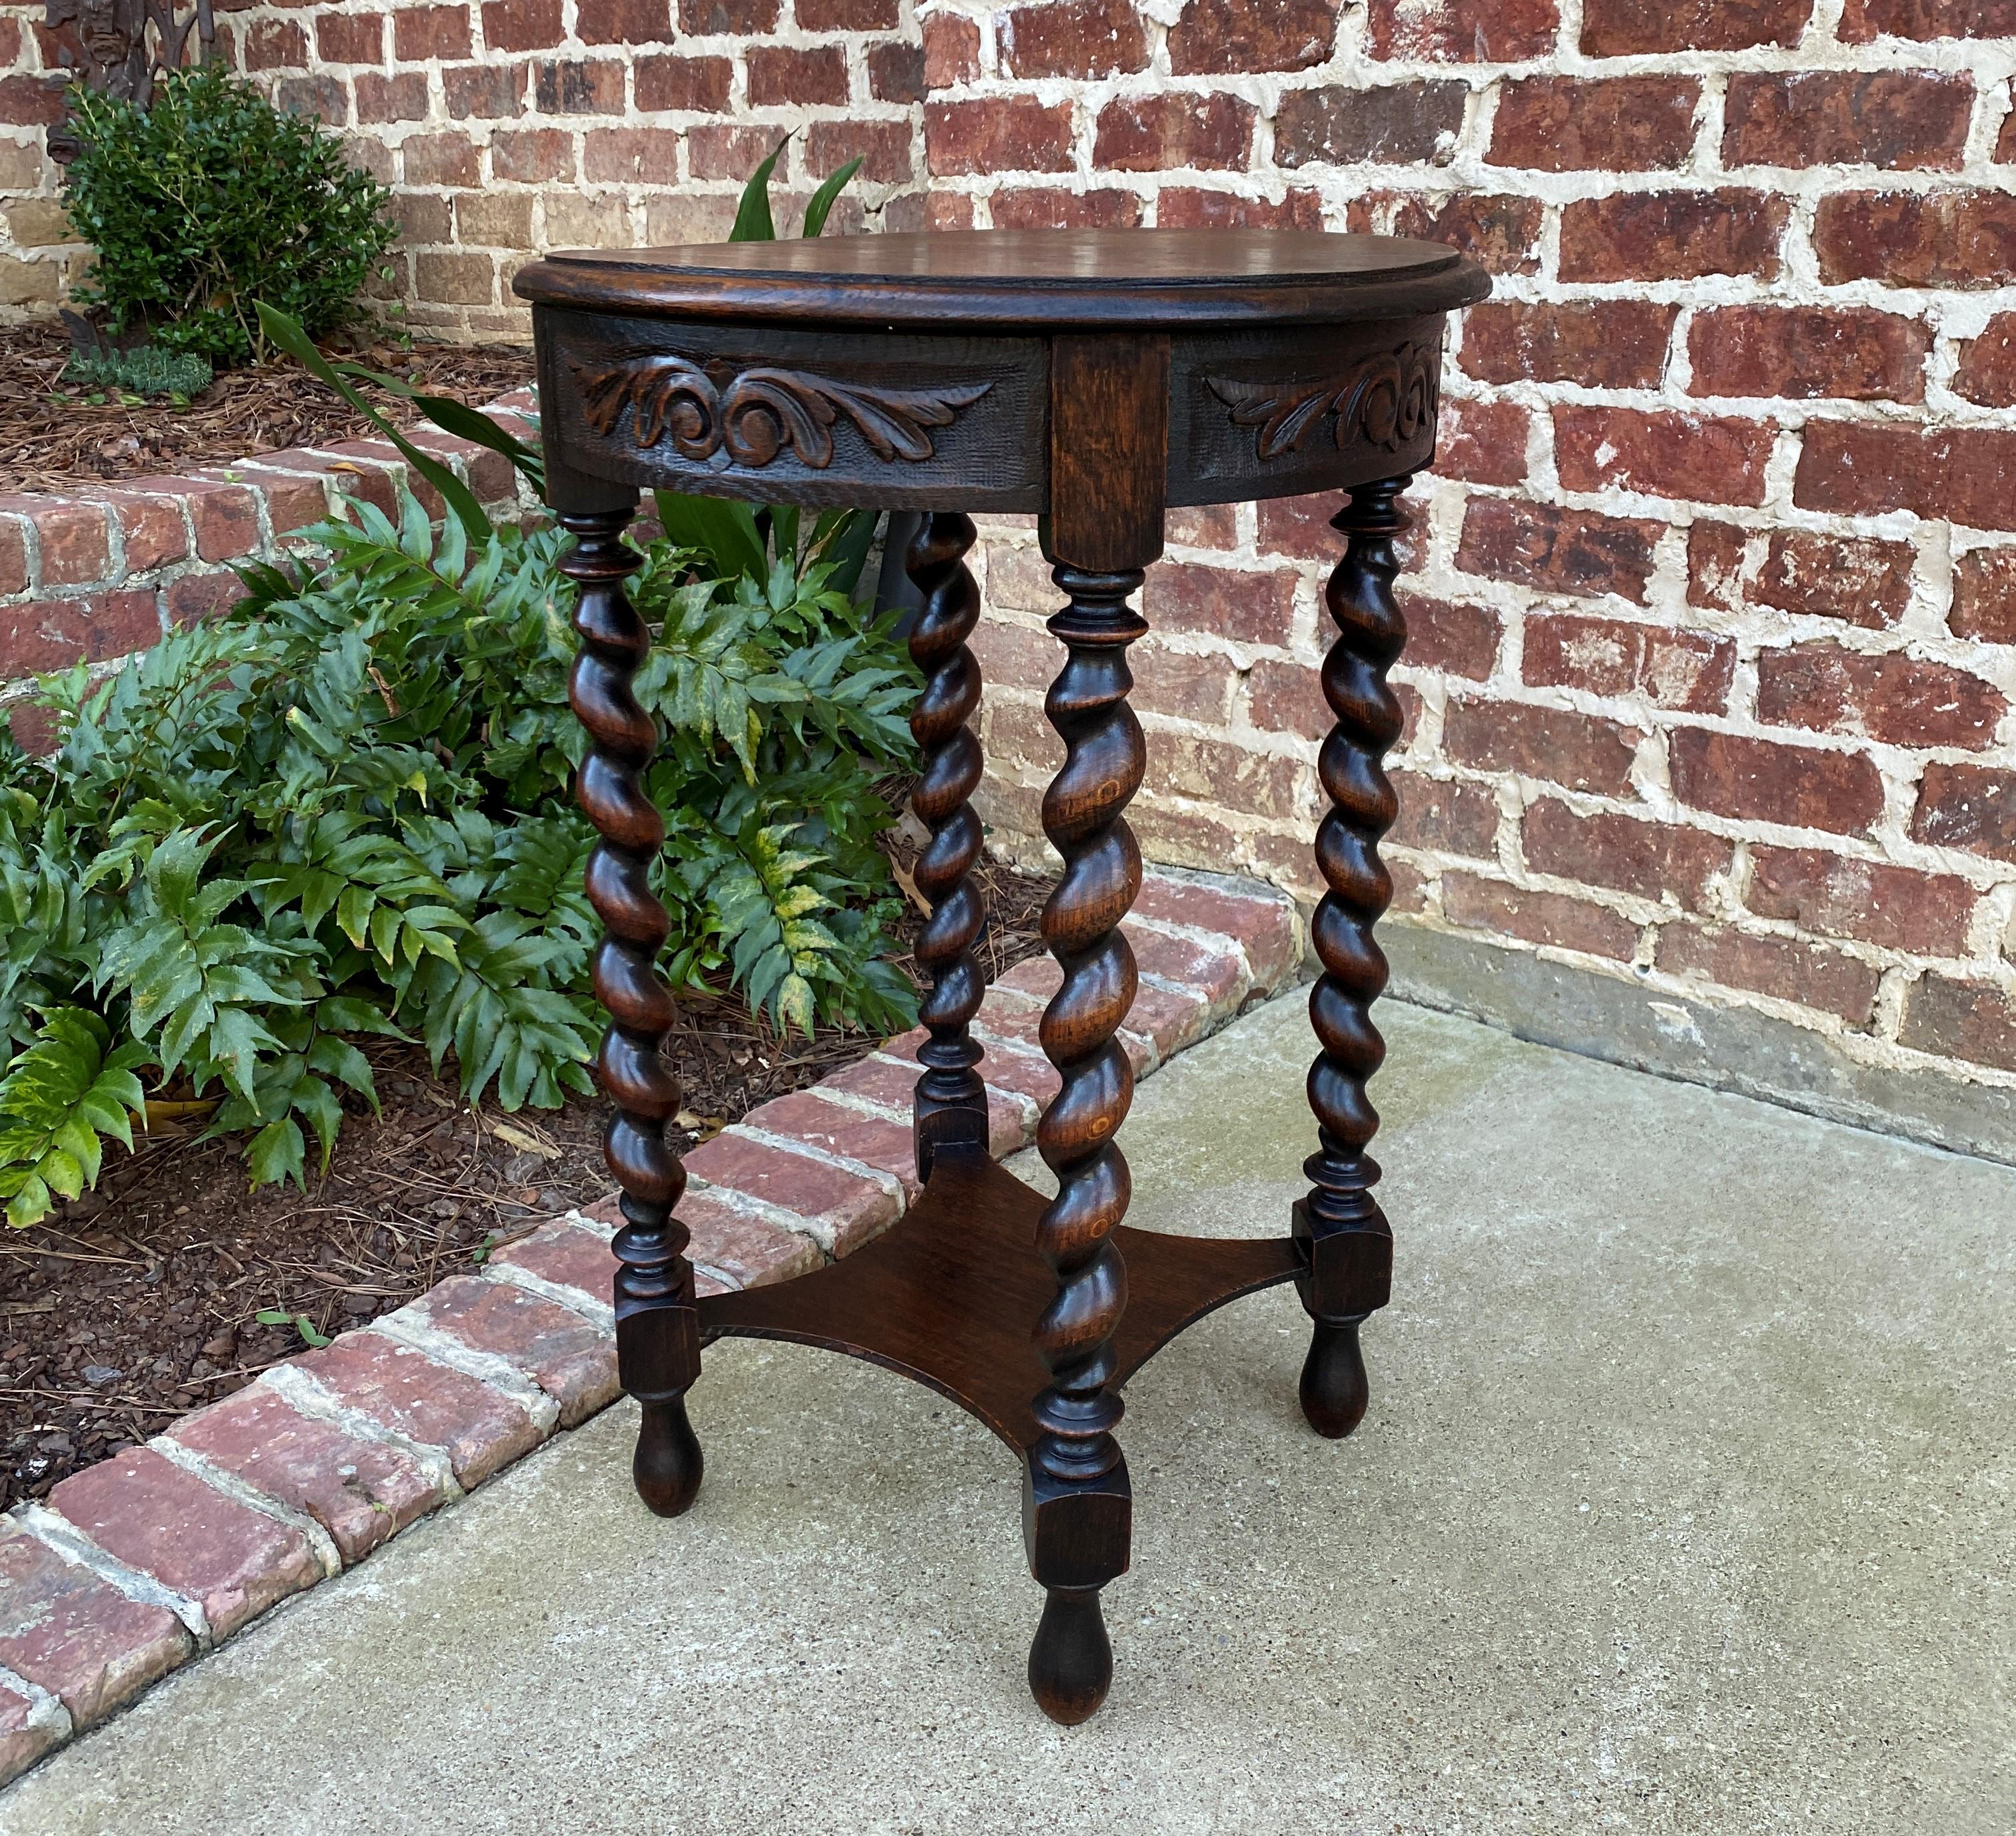 Charming antique English oak round end table, occasional table or nightstand/bed table ~~barley twist legs~~c. 1930s

Round tables are so hard to find~~beautiful and versatile size with beveled edge top, thick barley twist legs, carved